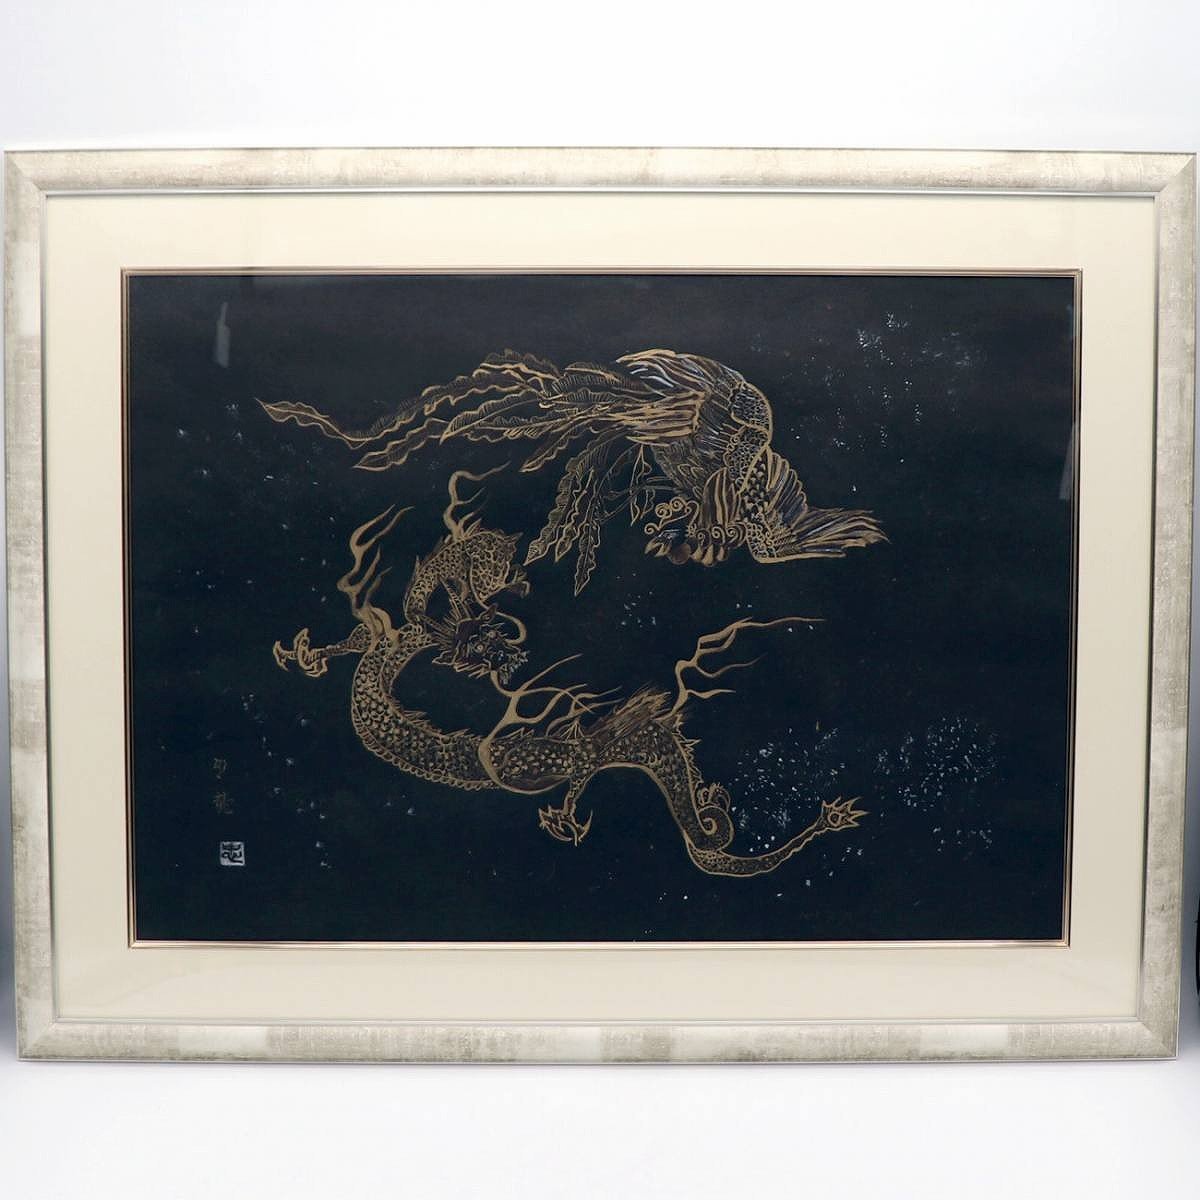 Tadashi Sato, Phoenix, Dragon, Painting, Framed, No. 200708-328, Packing size 140, Painting, watercolor, others